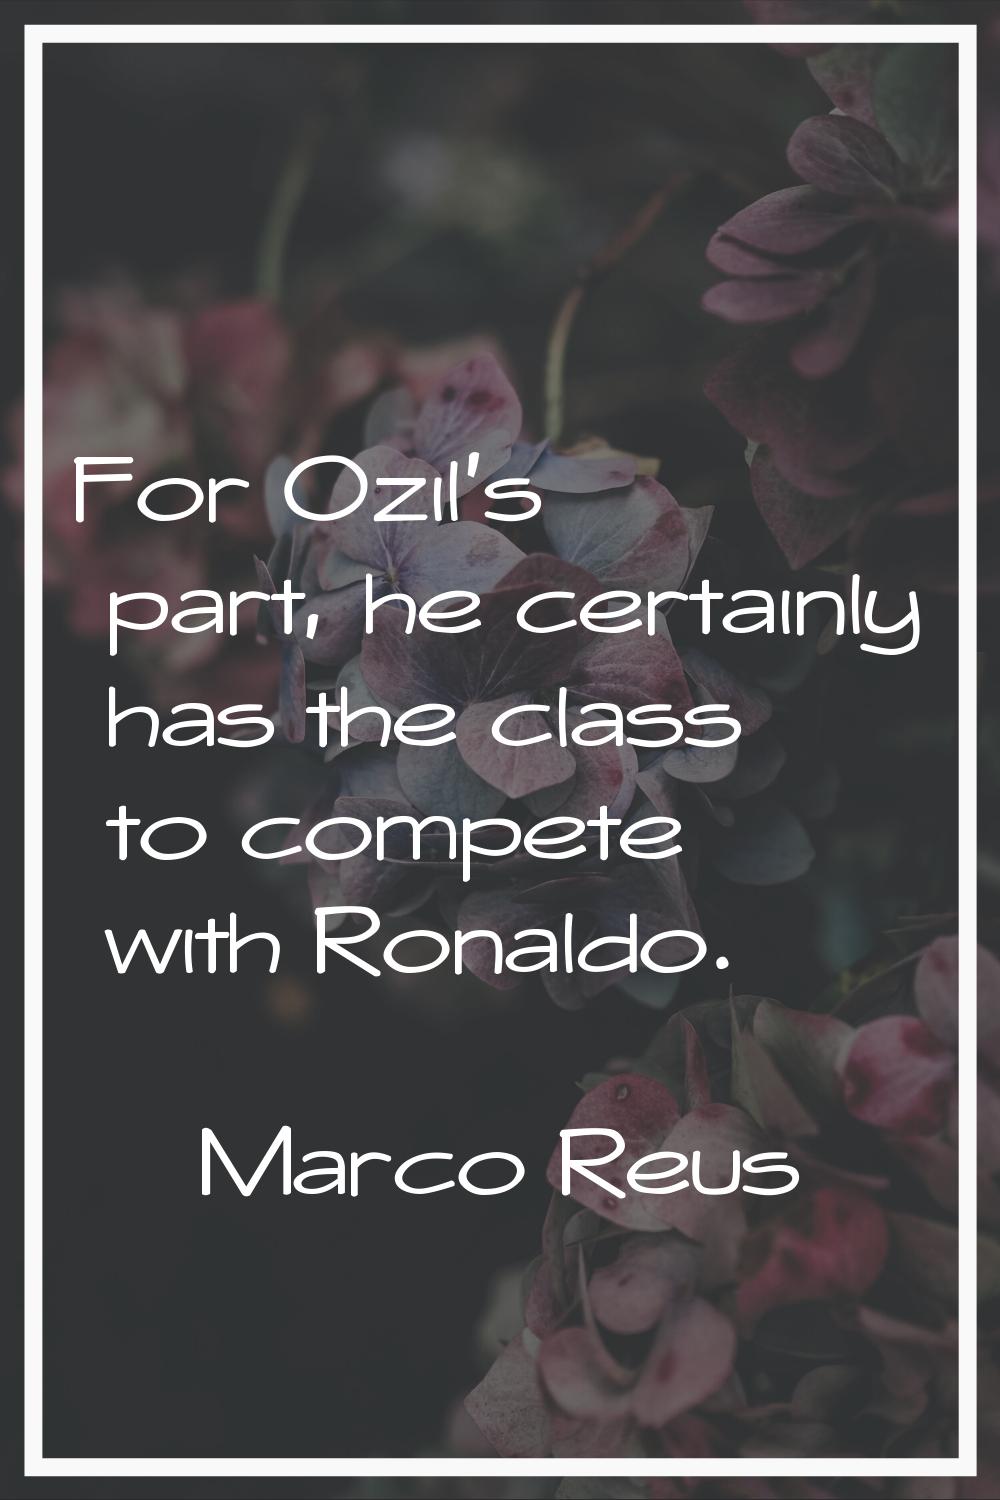 For Ozil's part, he certainly has the class to compete with Ronaldo.